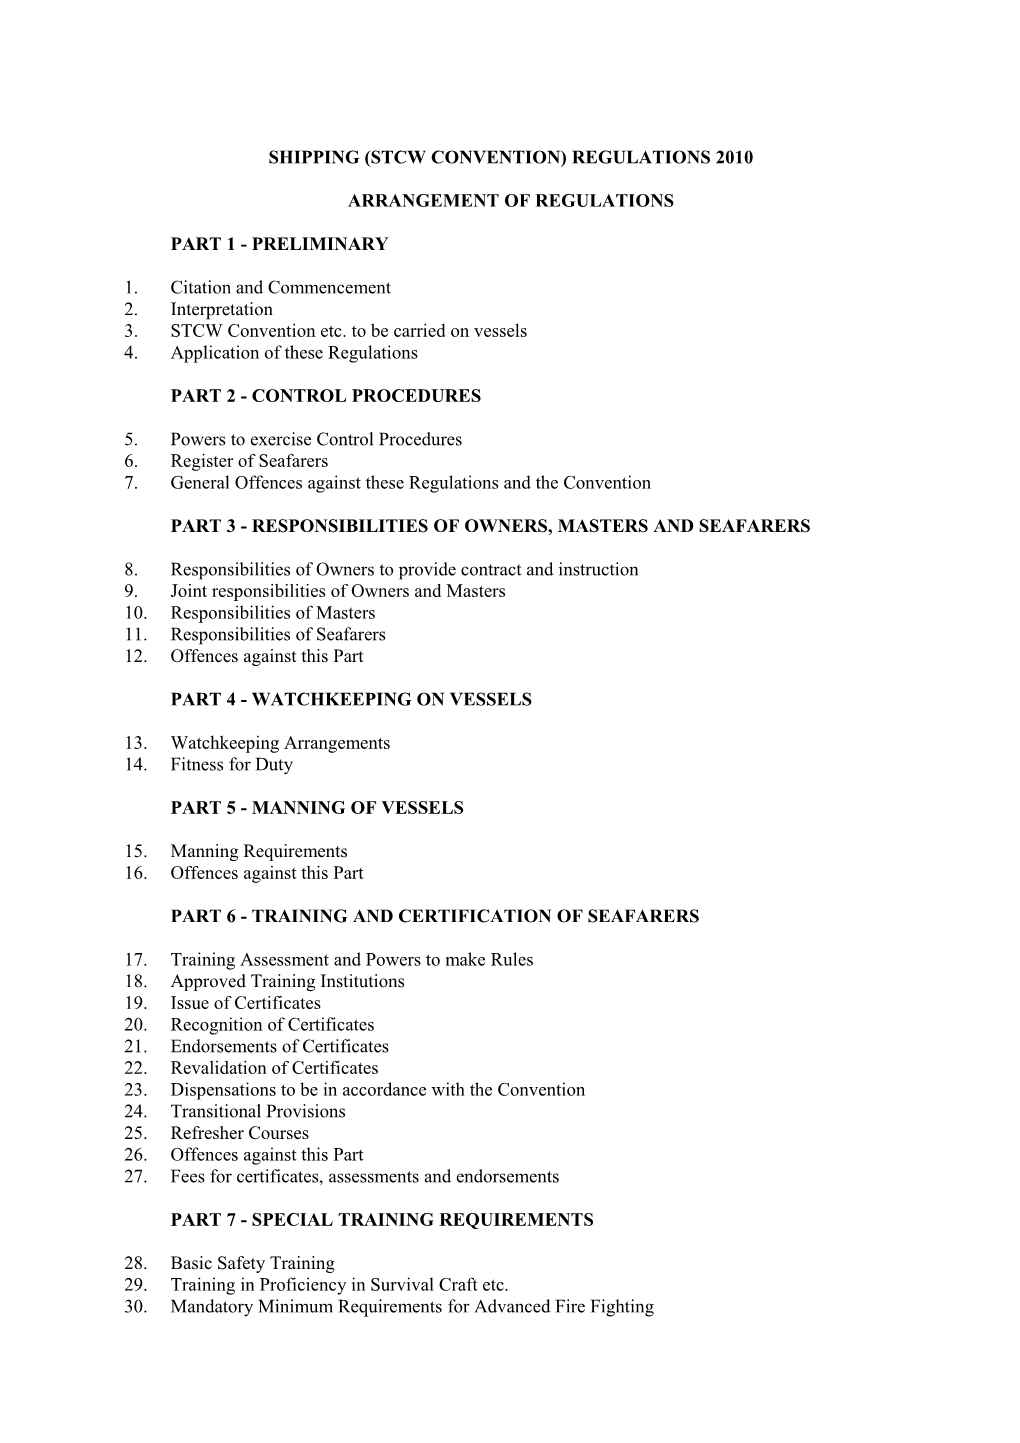 Shipping (Stcw Convention) Regulations 2010